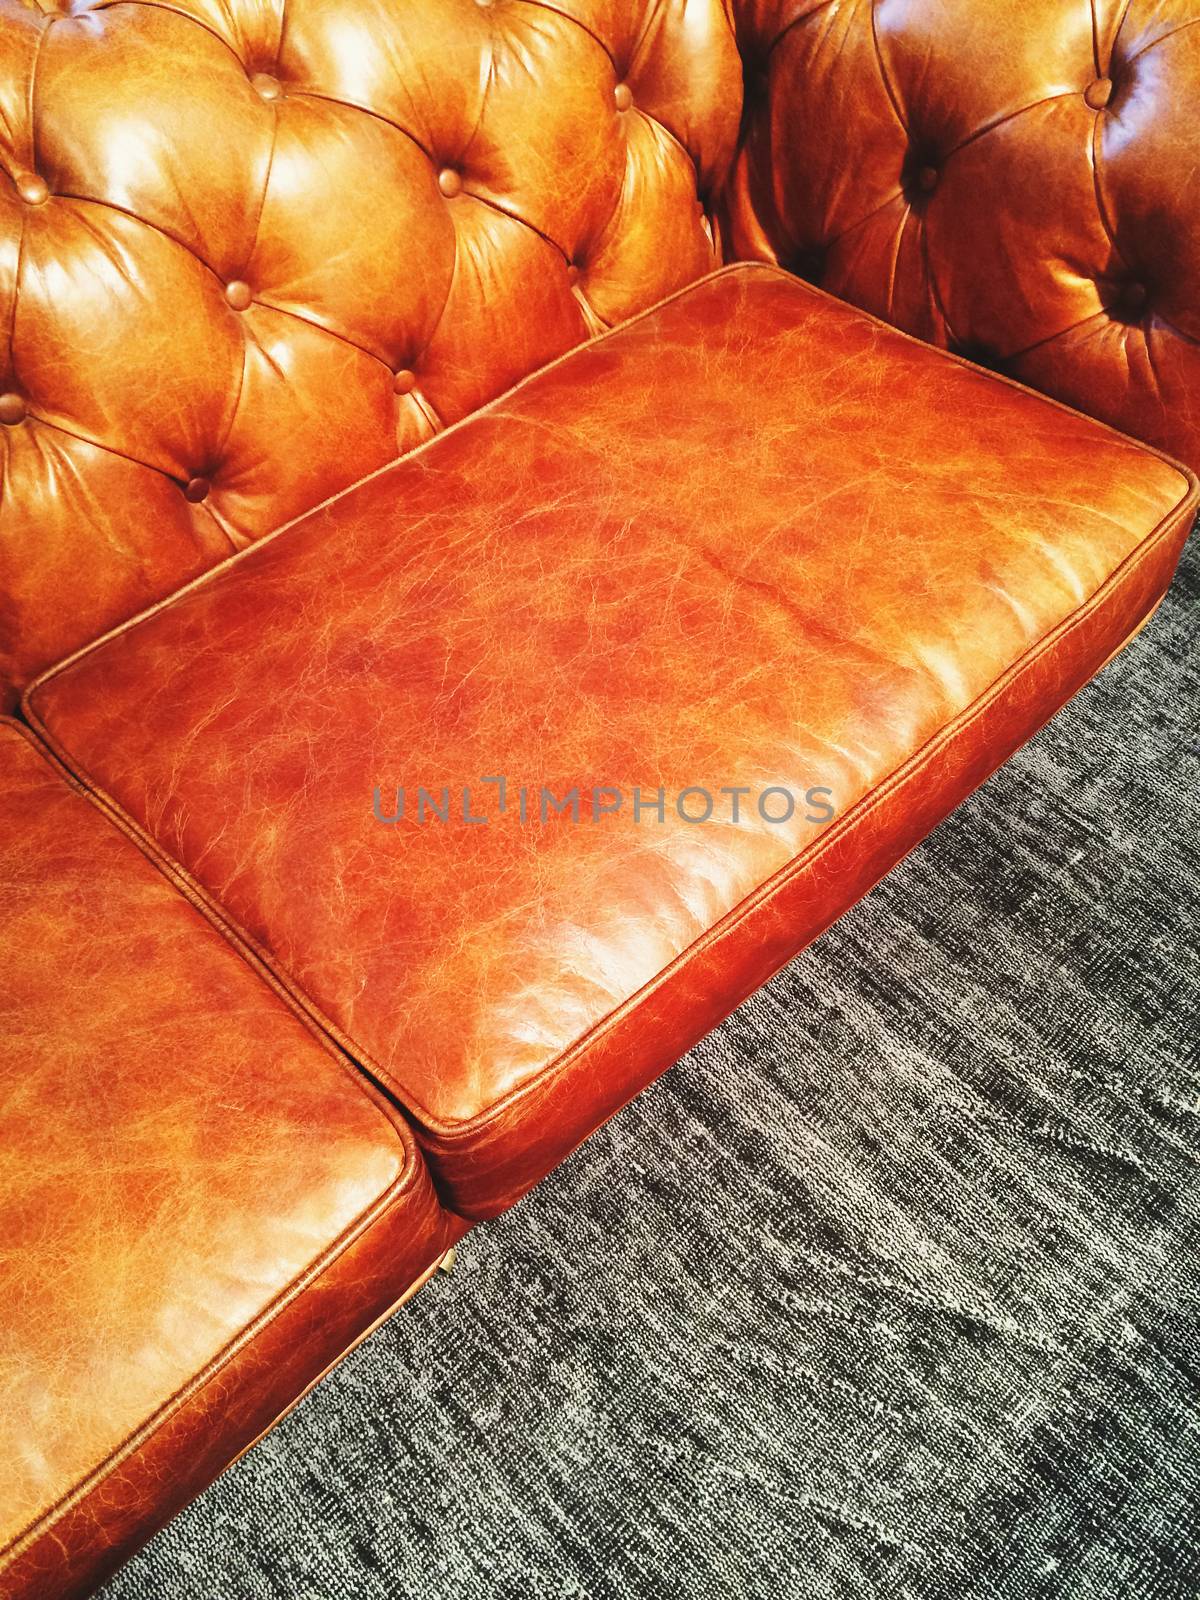 Luxurious classic style leather sofa on gray carpet.